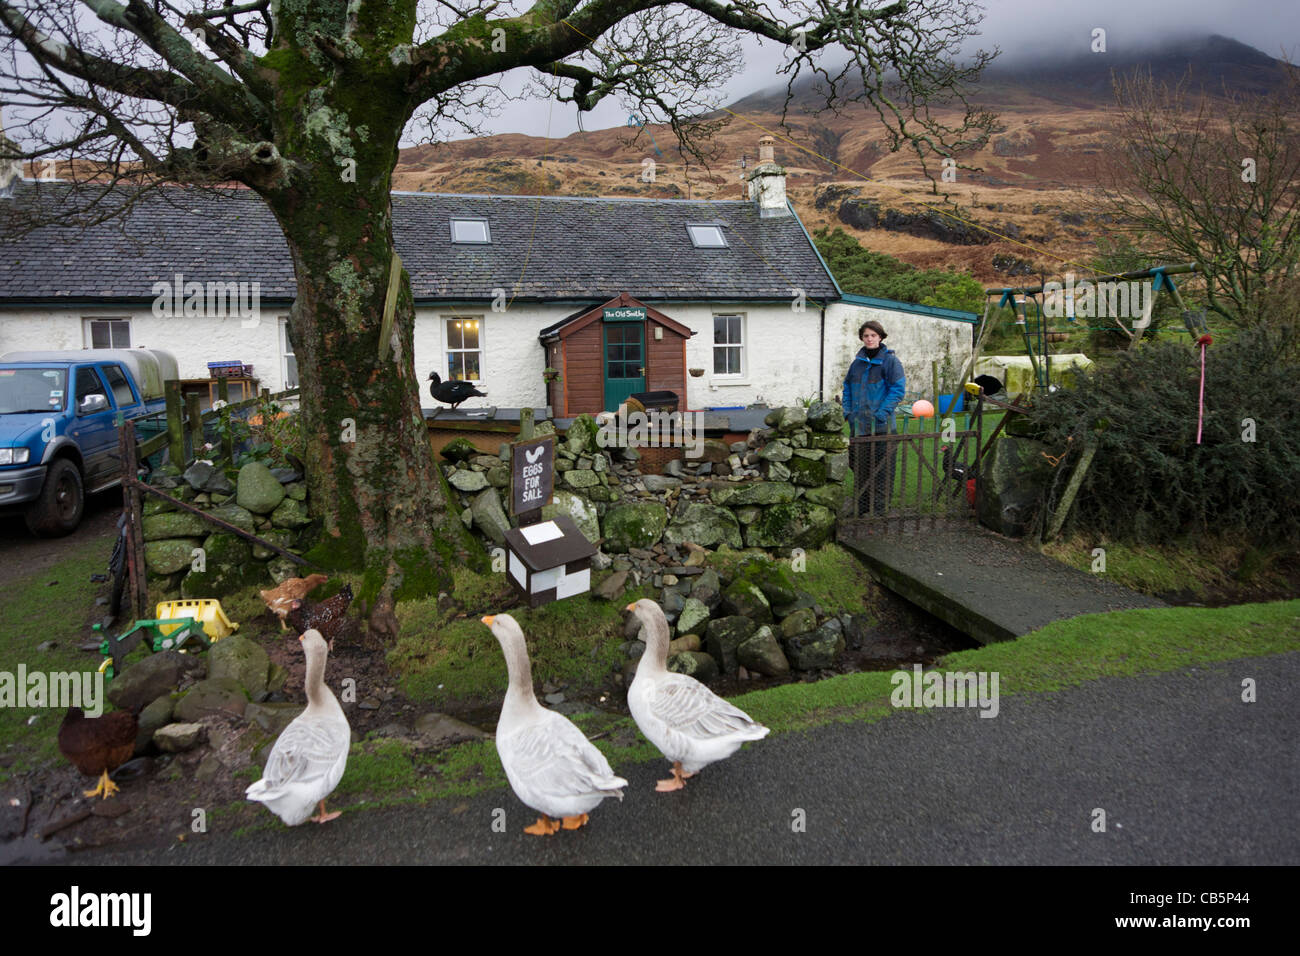 Estate worker Sarah Leggitt's estate cottage, a former Smithy now rearing livestock at Lochbuie, Isle of Mull, Scotland. Stock Photo